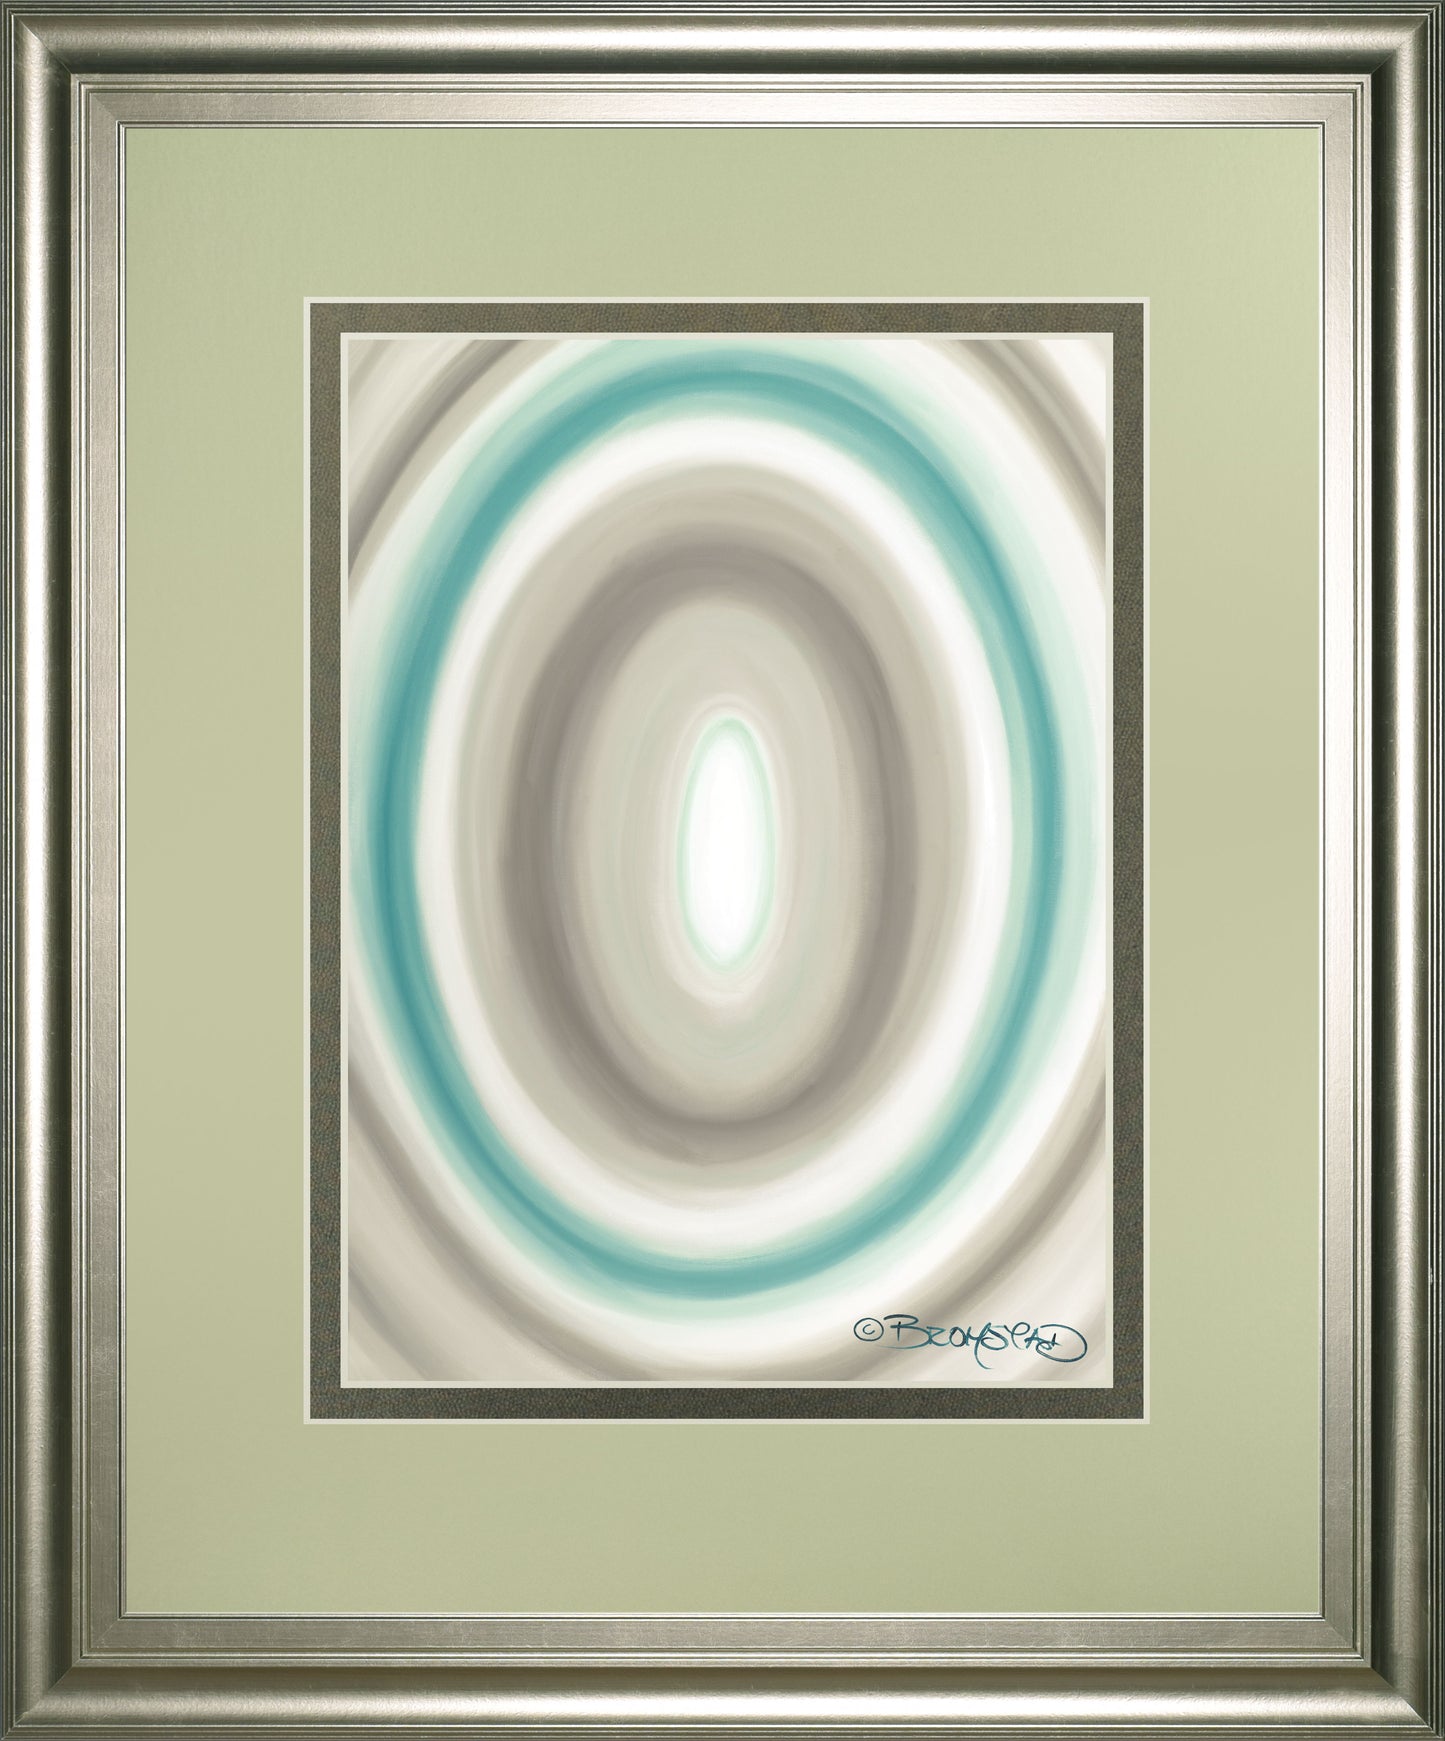 Concentric Ovals #1 By David Bromstad - Framed Print Wall Art - Blue